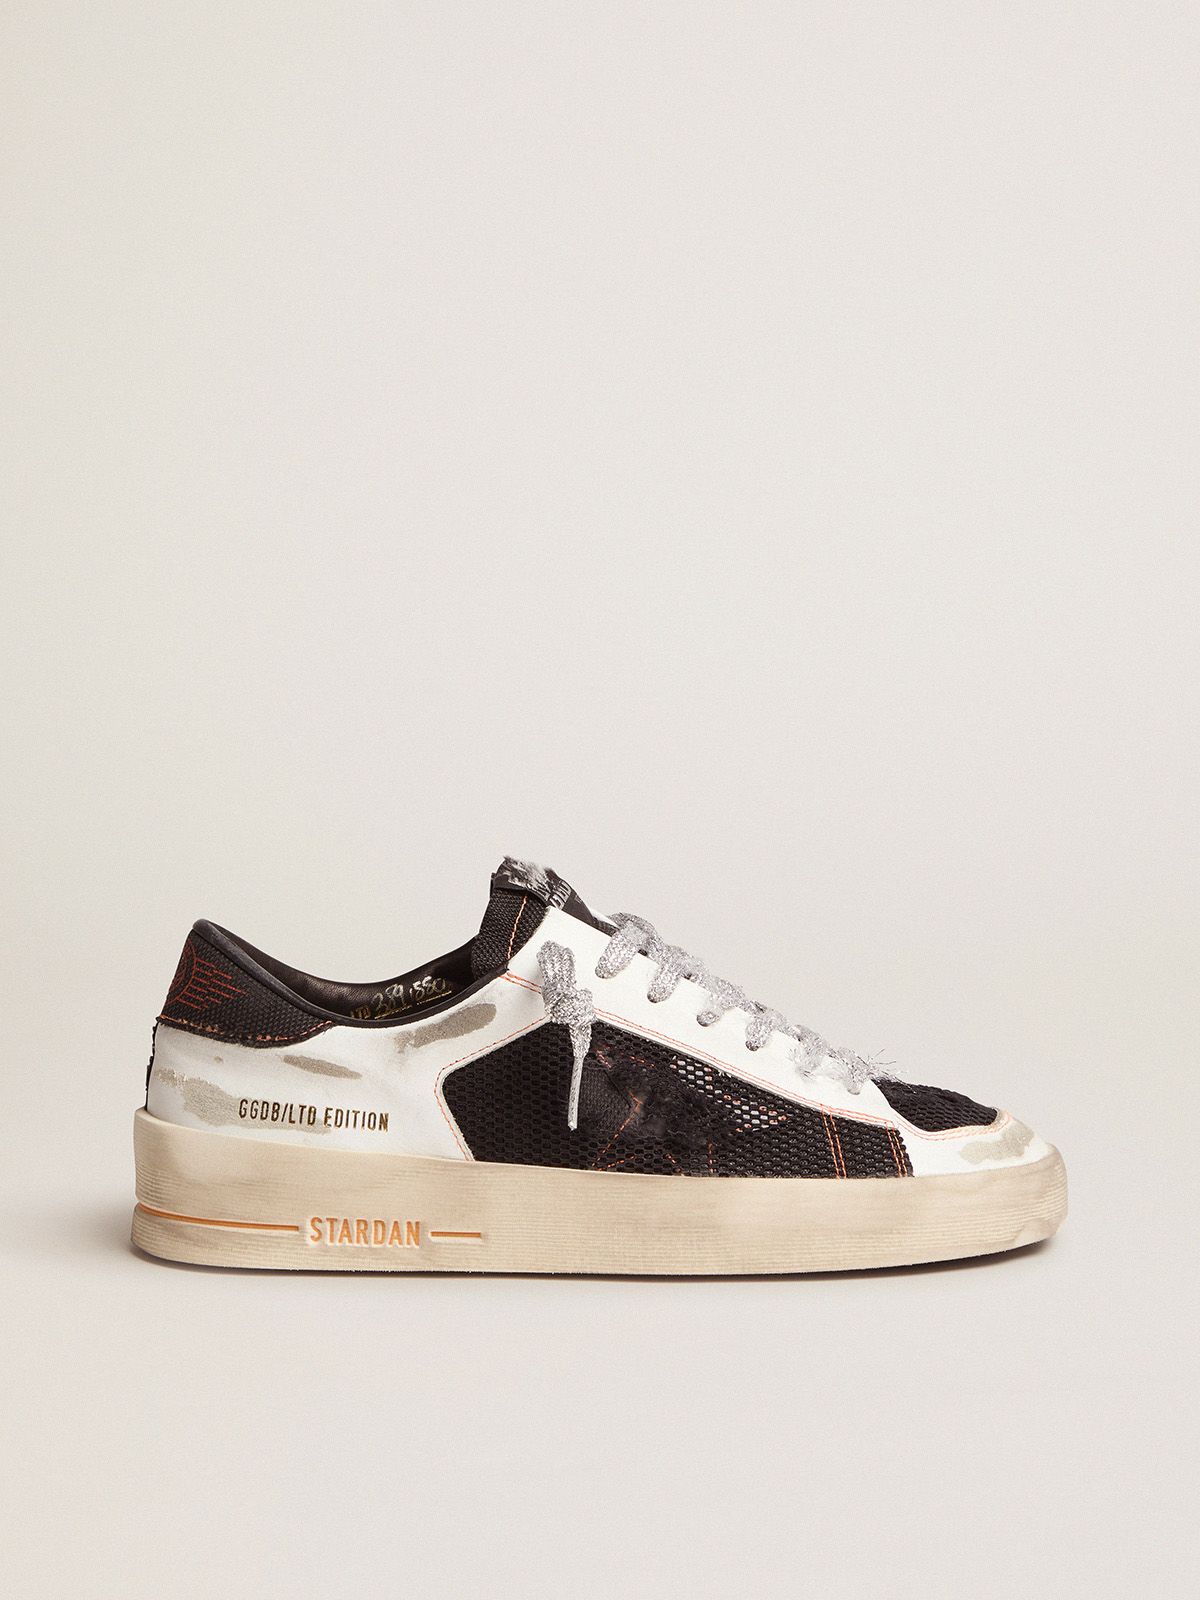 Golden Goose Saldi Uomo White Limited Edition LAB Stardan sneakers with silver laces